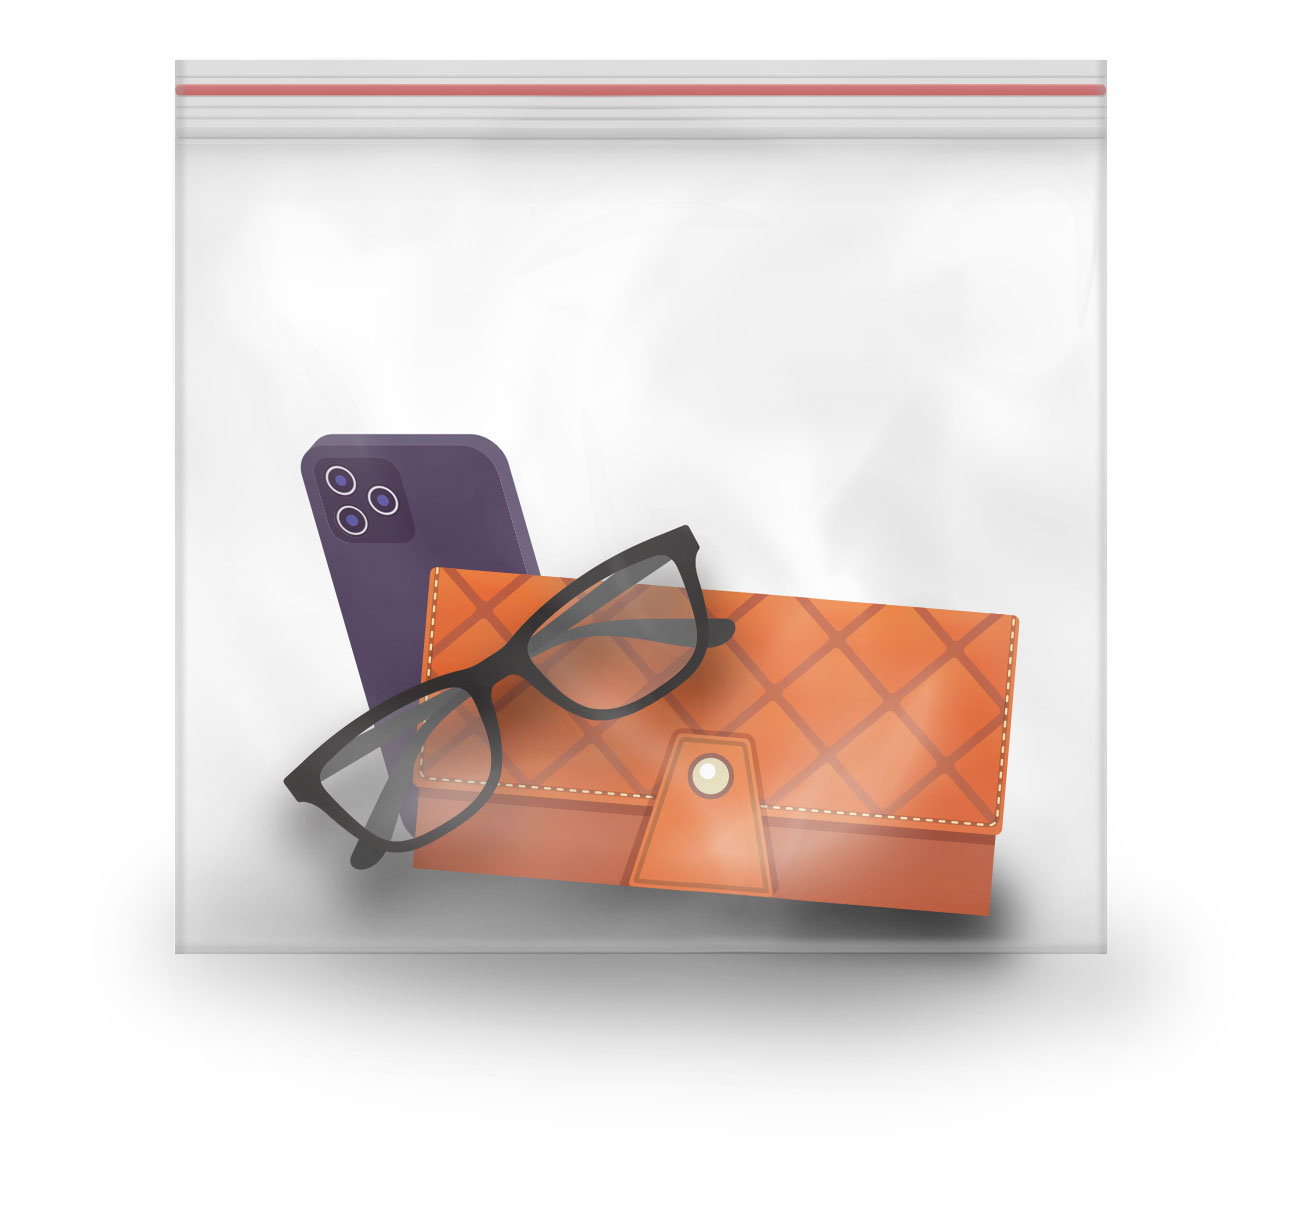 Clear Ziplock bag with personal items inside